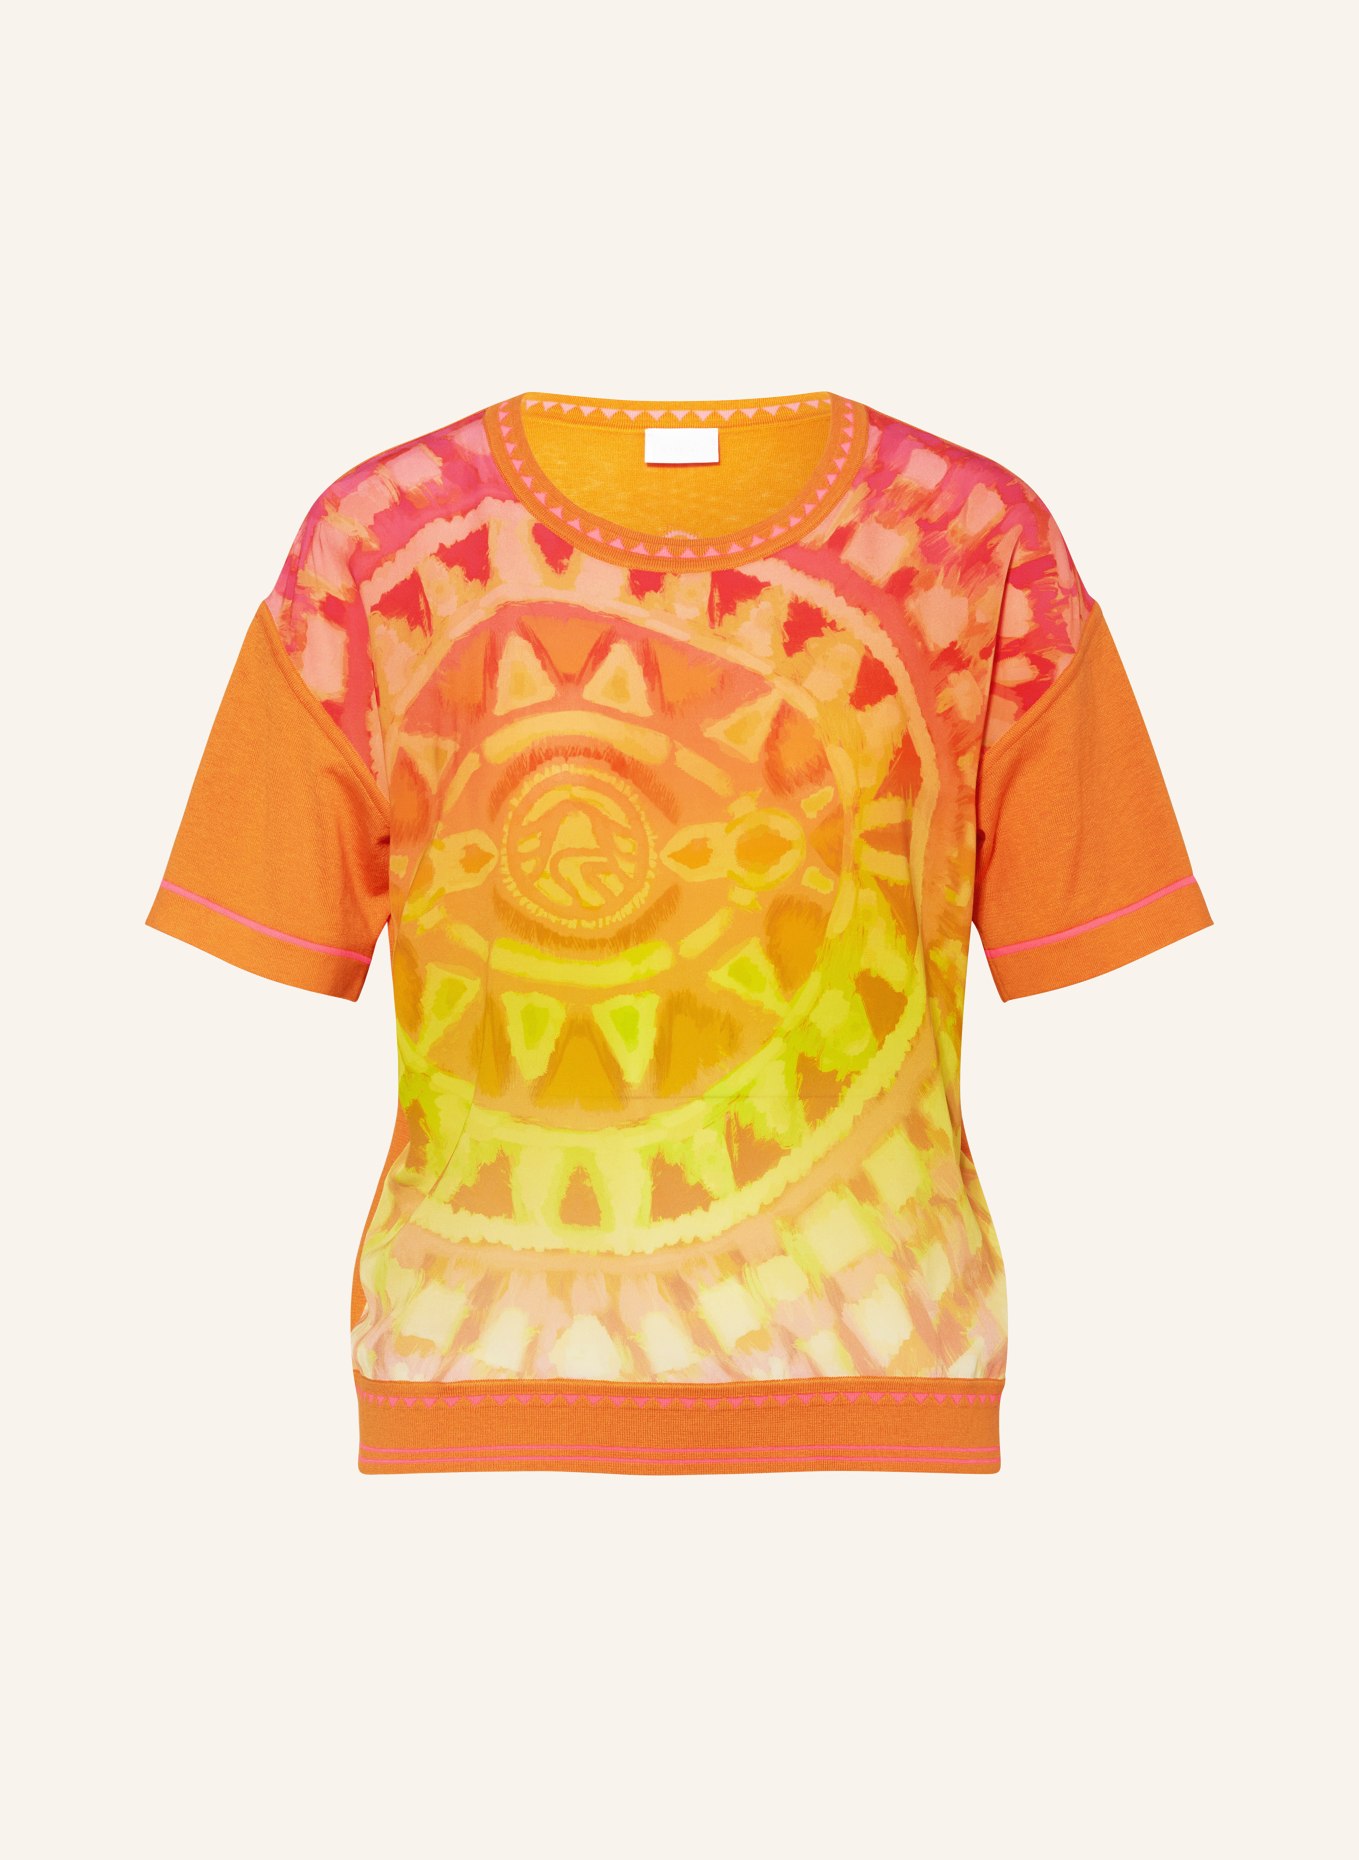 SPORTALM T-shirt in mixed materials, Color: ORANGE/ YELLOW/ NEON PINK (Image 1)